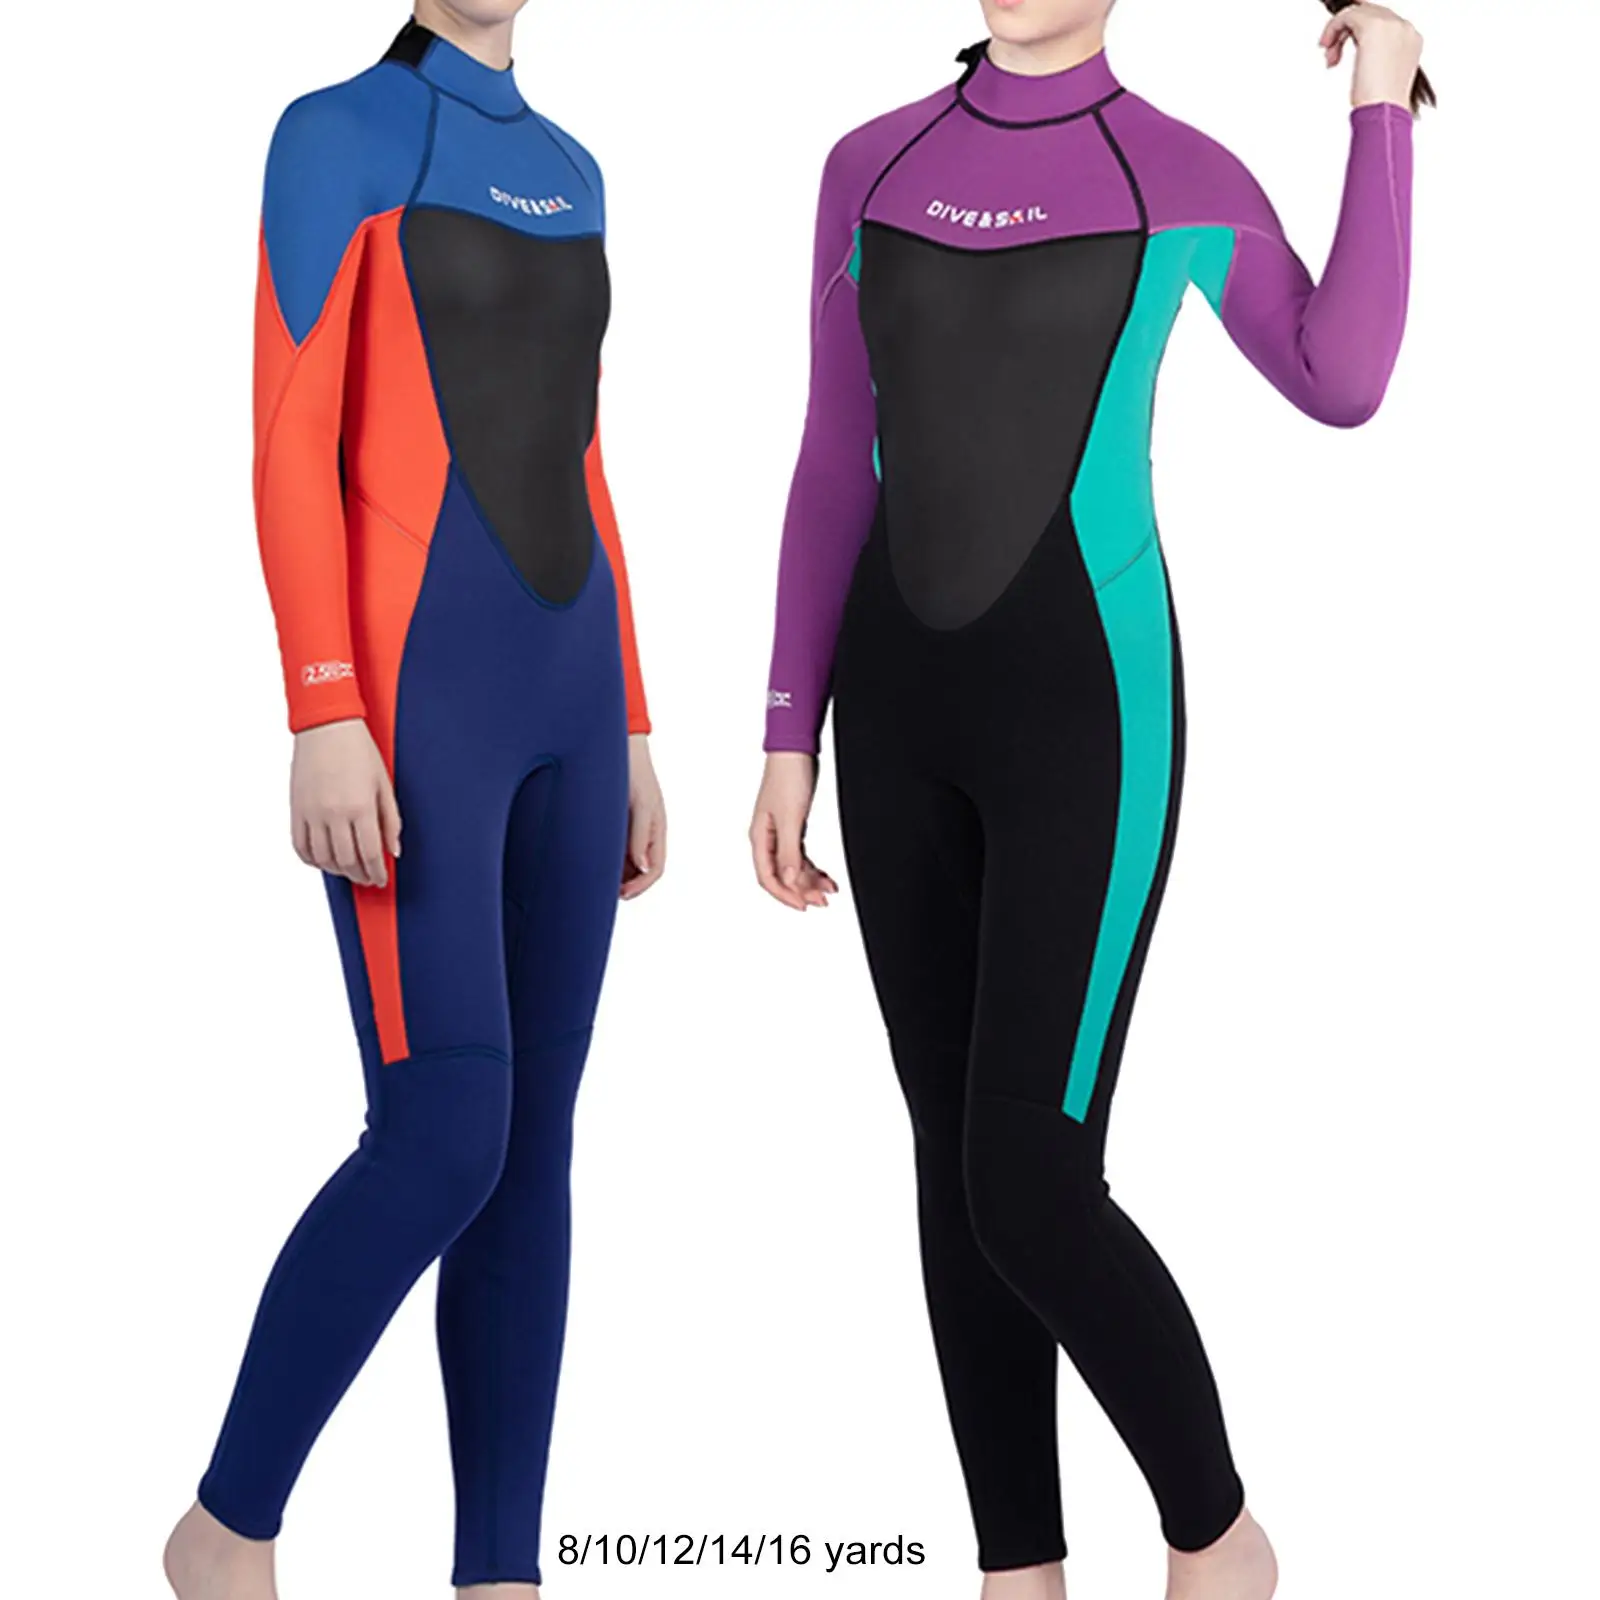 Wetsuit 2.5mm Neoprene Workout Child Wet Suit for Kayak Water Sports Sailing